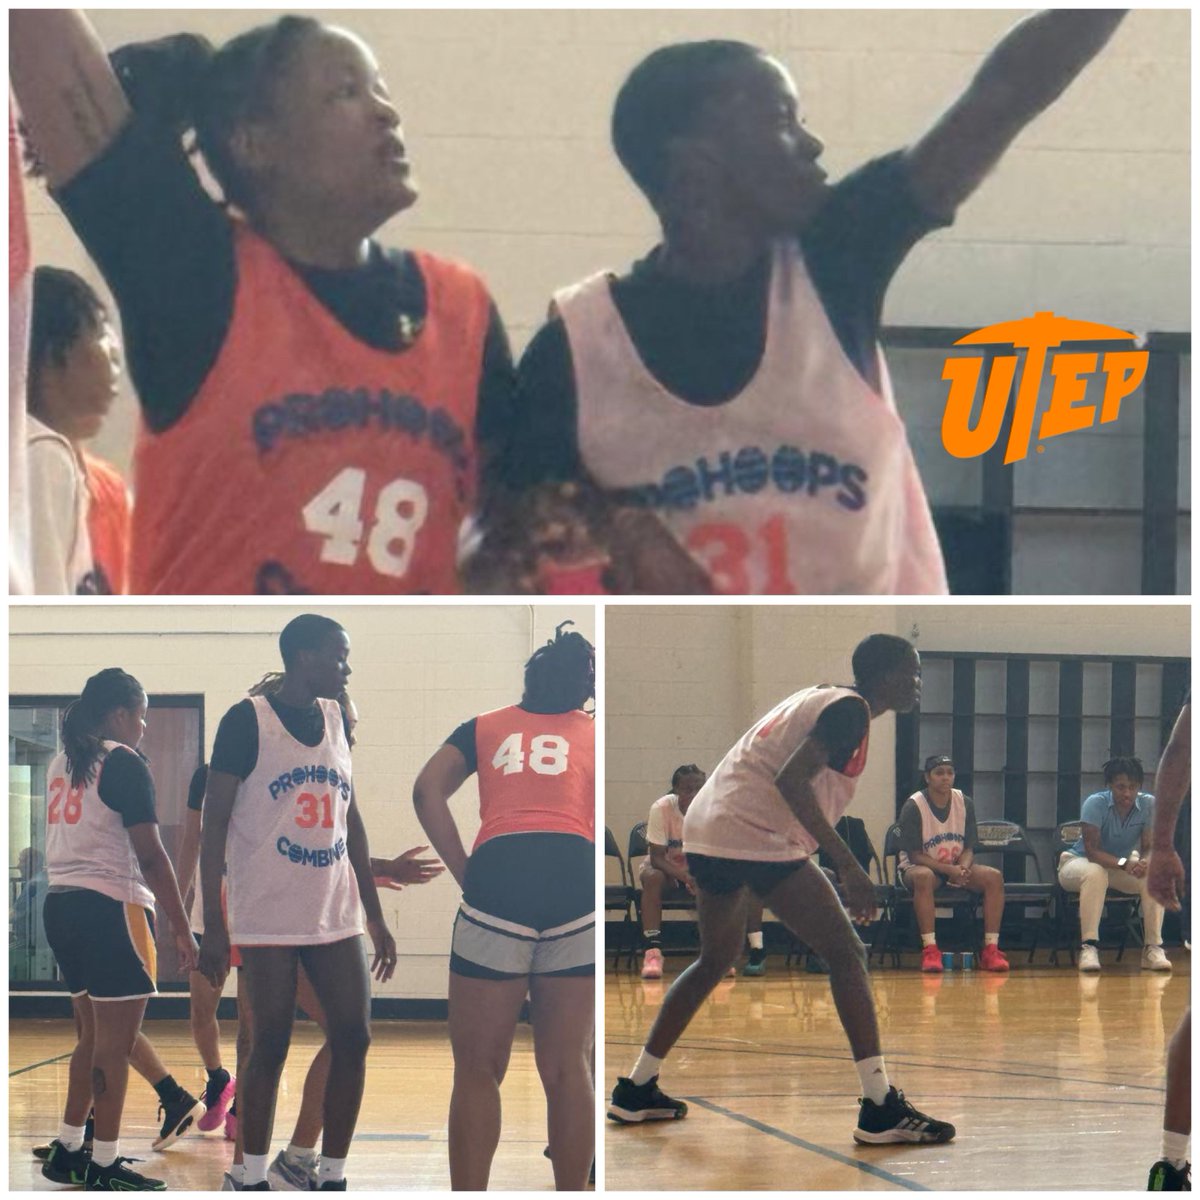 ⁦@UTEPWBB⁩ ⁦@JaneAsinde⁩ had great showing today at the pro 🏀combine. 🧡💙🤙